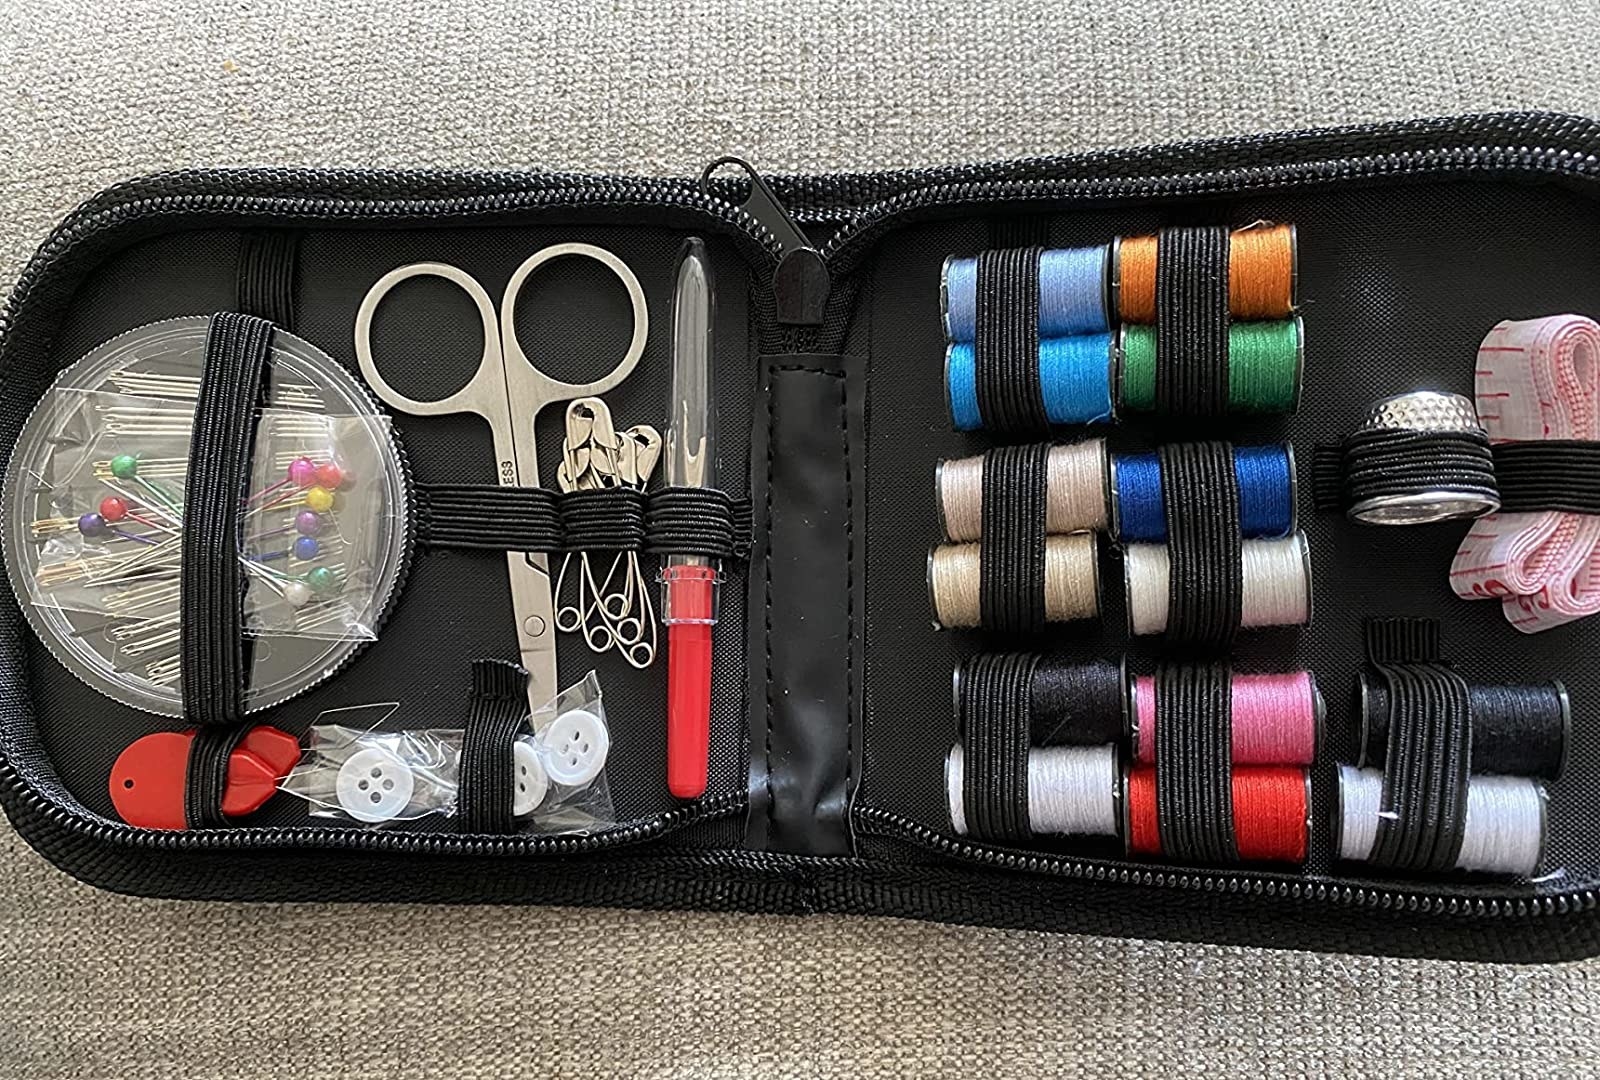 the sewing kit with different strings and other scissors and pins in the kit